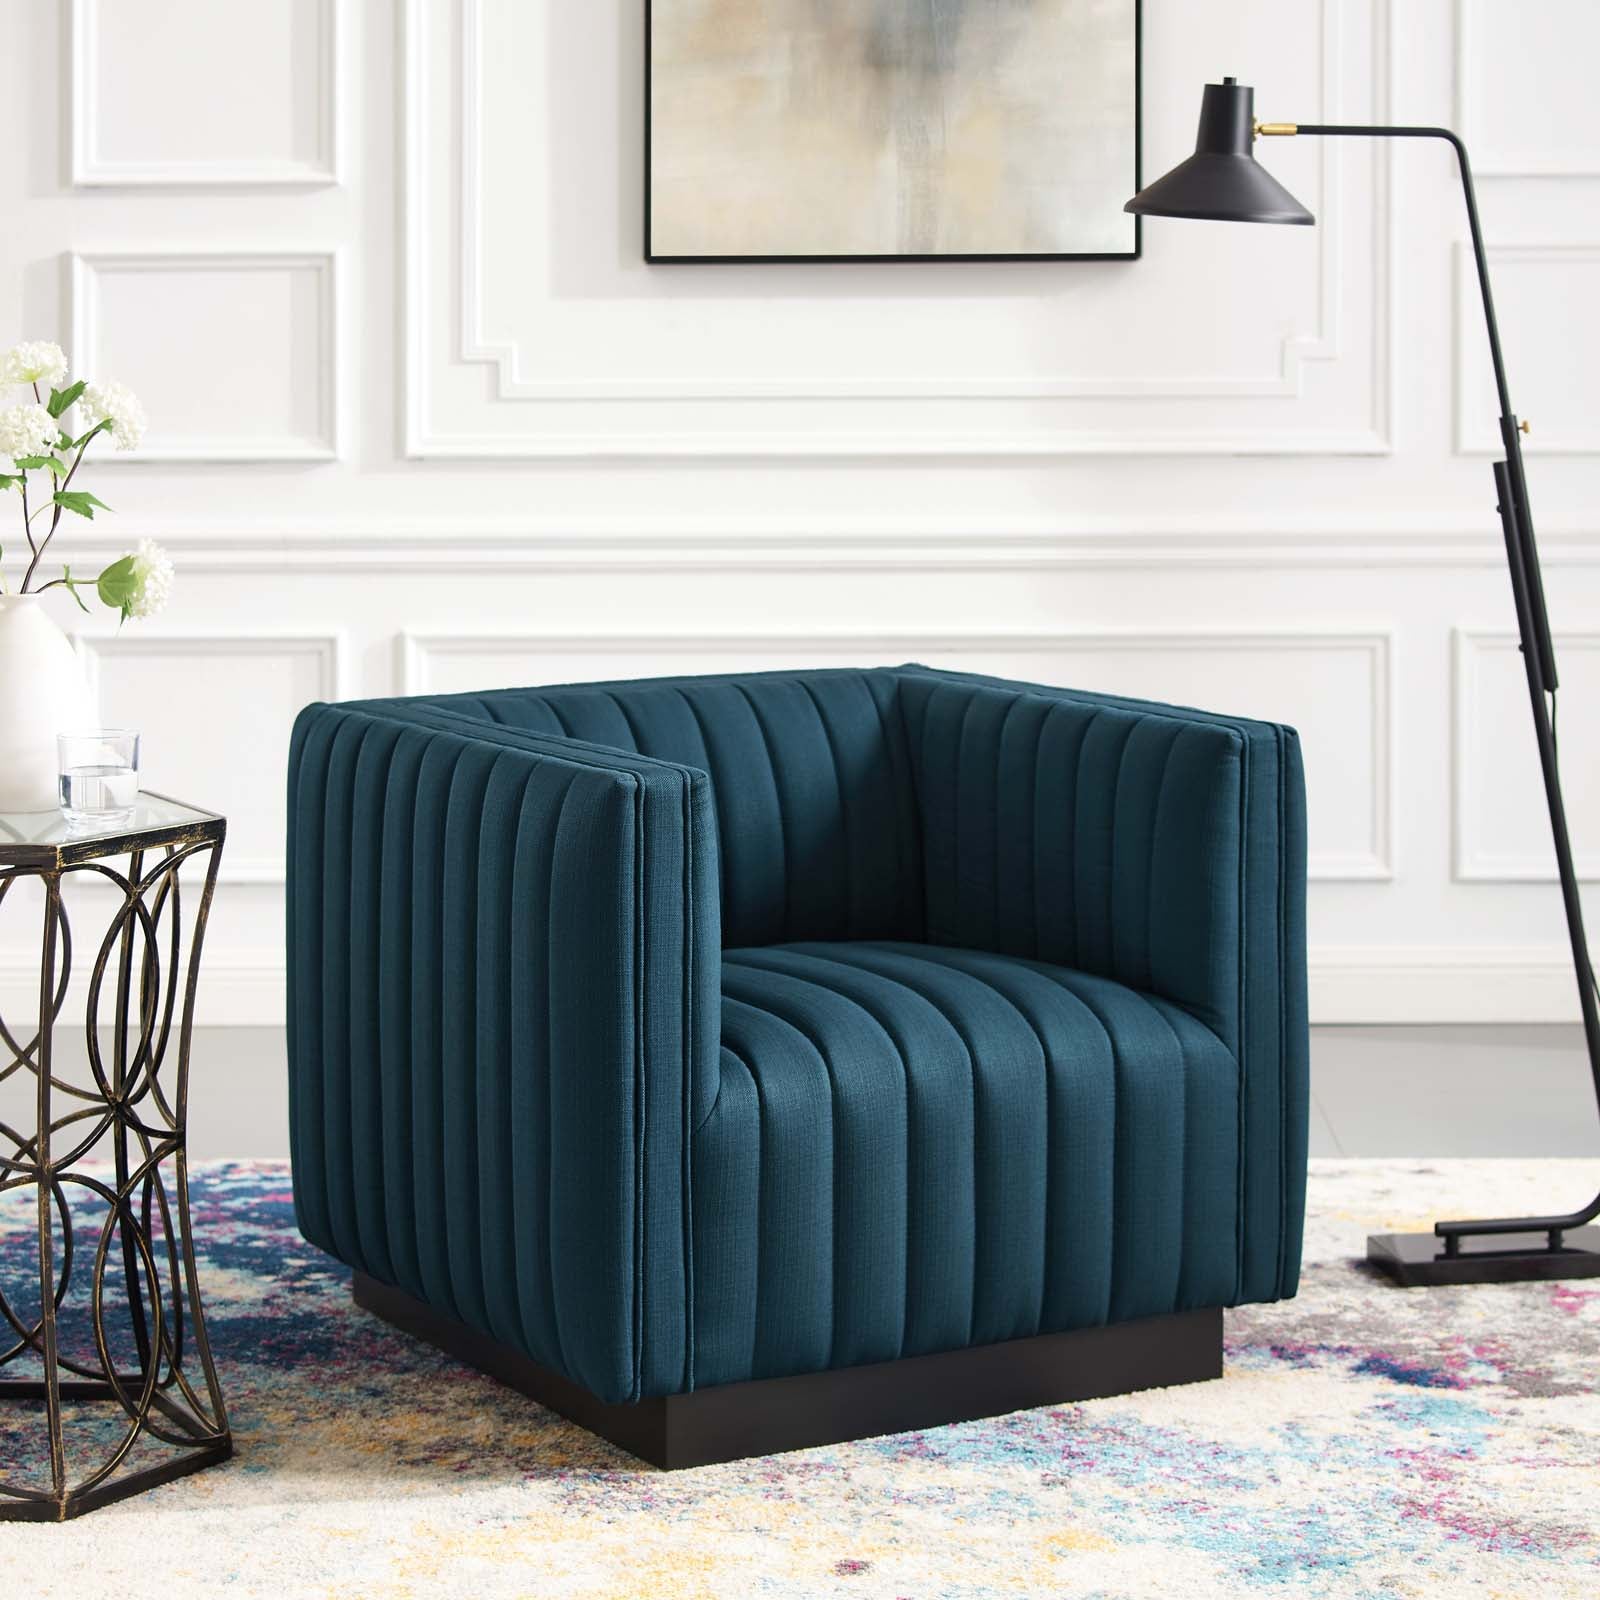 Conjure Tufted Upholstered Fabric Armchair - East Shore Modern Home Furnishings